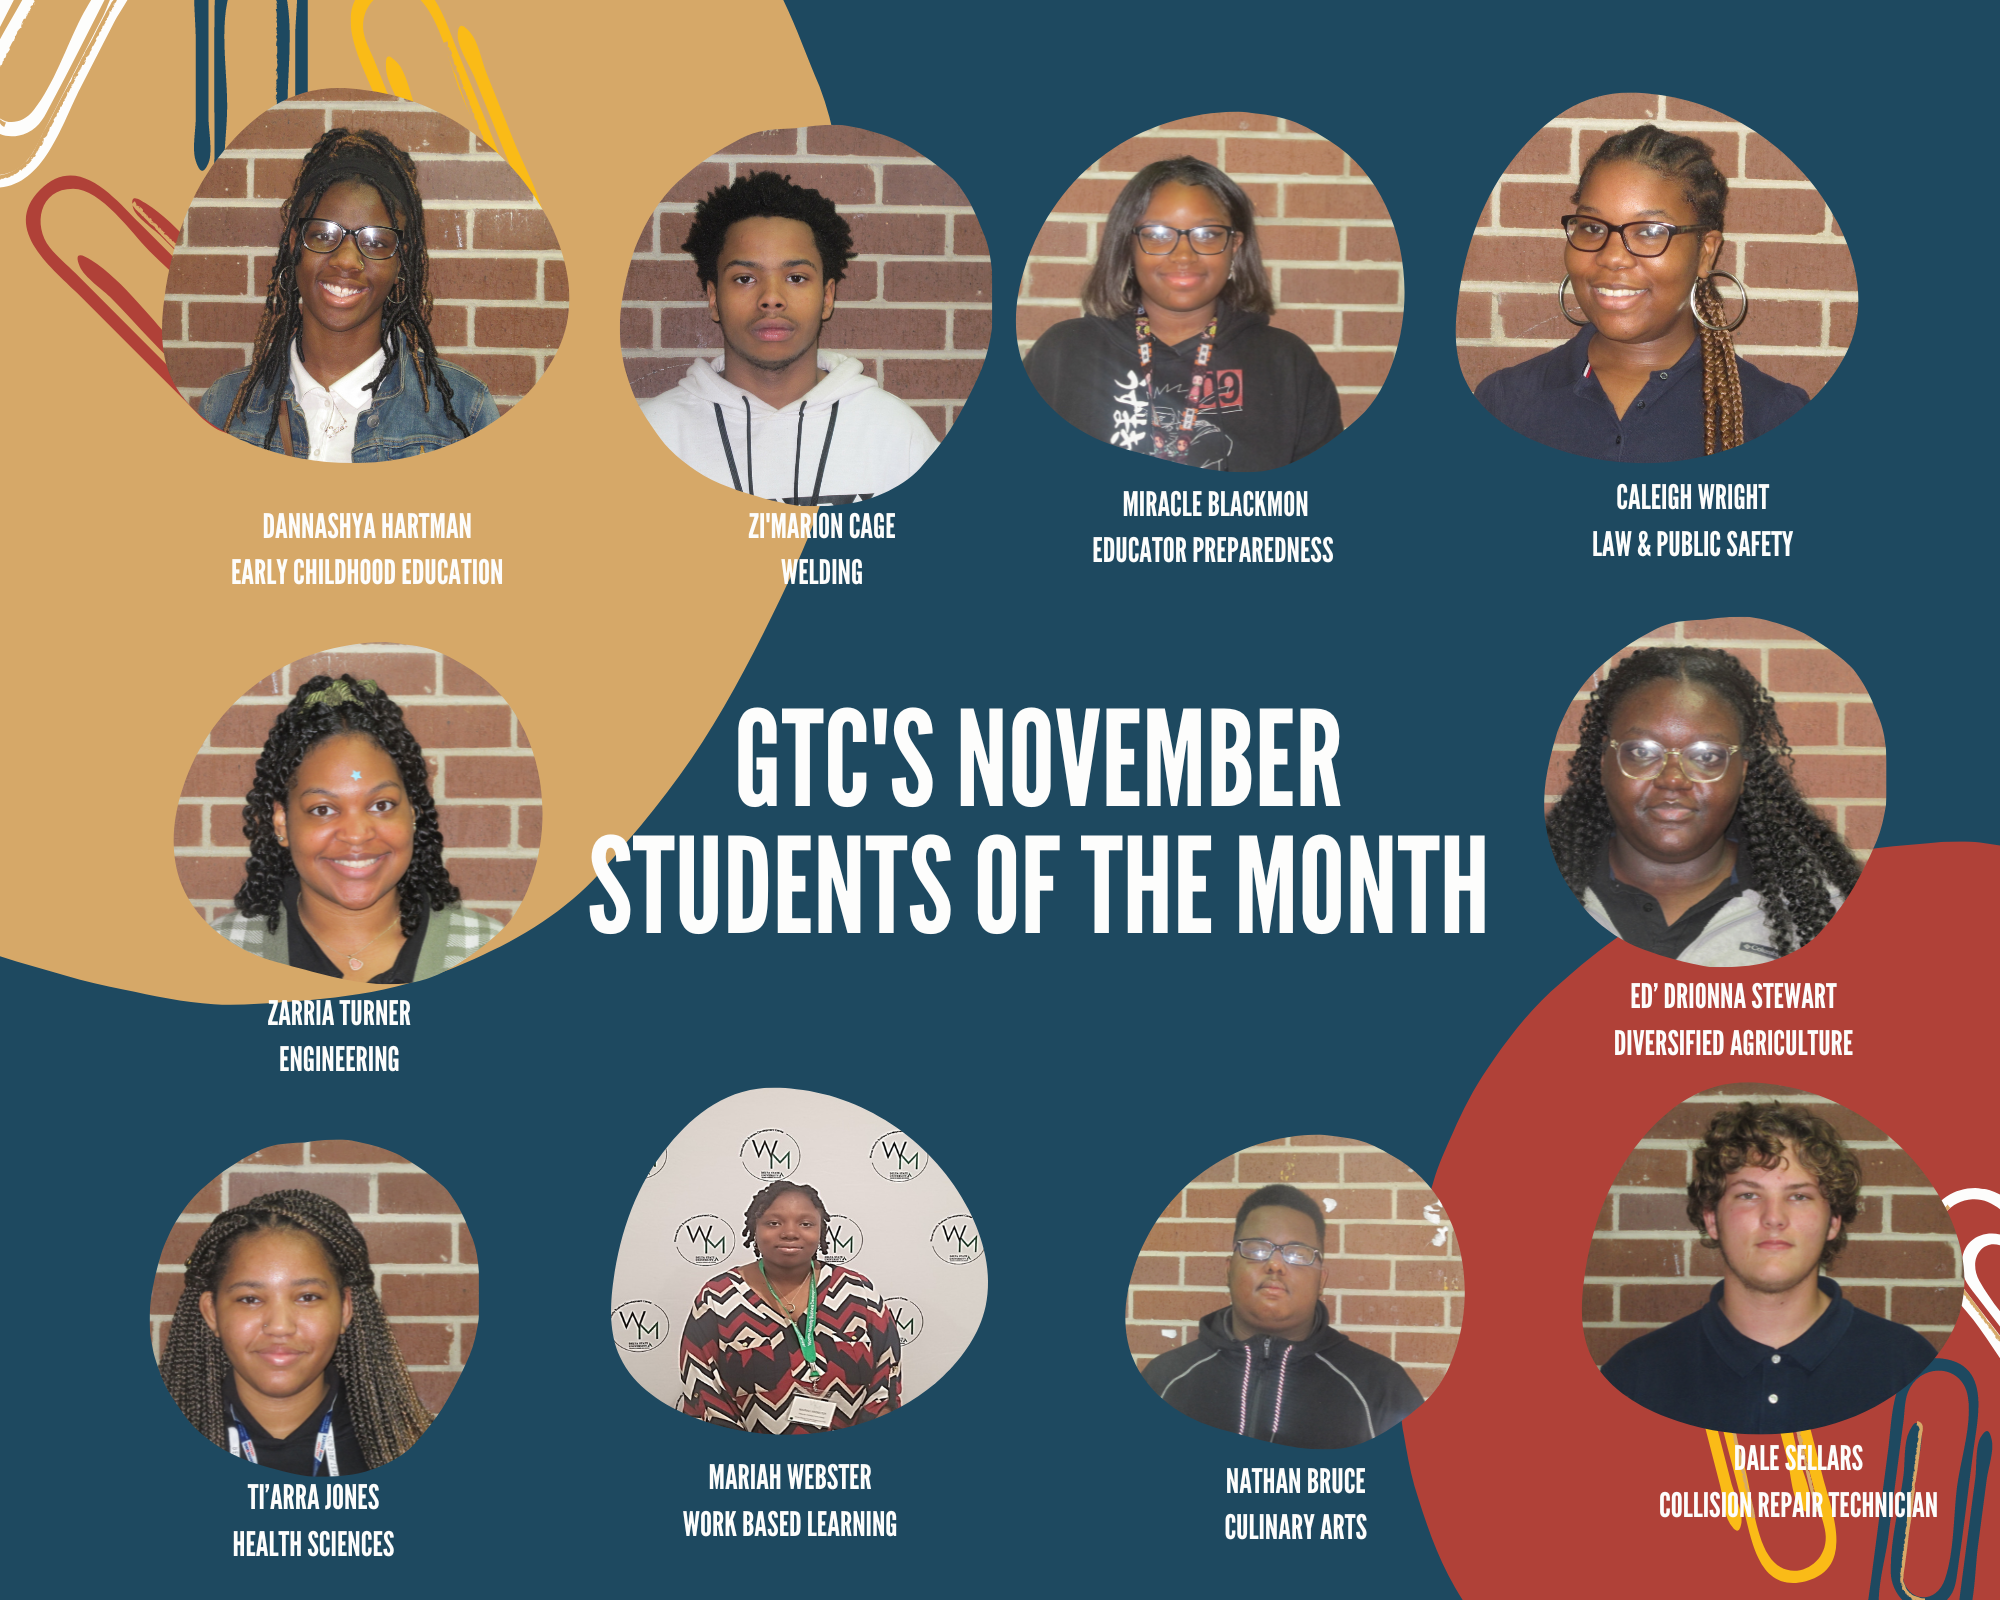 GTC's November Students of the Month Z'arria Turner, Engineering; Z'Marion Cage, Welding; Nathan Bruce, Culinary Arts; Marion Webster, Work Based Learning; Miracle Blackmon, Educator Preparedness; Ed'drionna Stewart, Diversified Ag.; Dannashya Hartman , Early Childhood Education; Ti'arra Jones, Health Science; Caleigh Wright, Law & Public Safety; Dale Sellers, Collision Repair Technician,